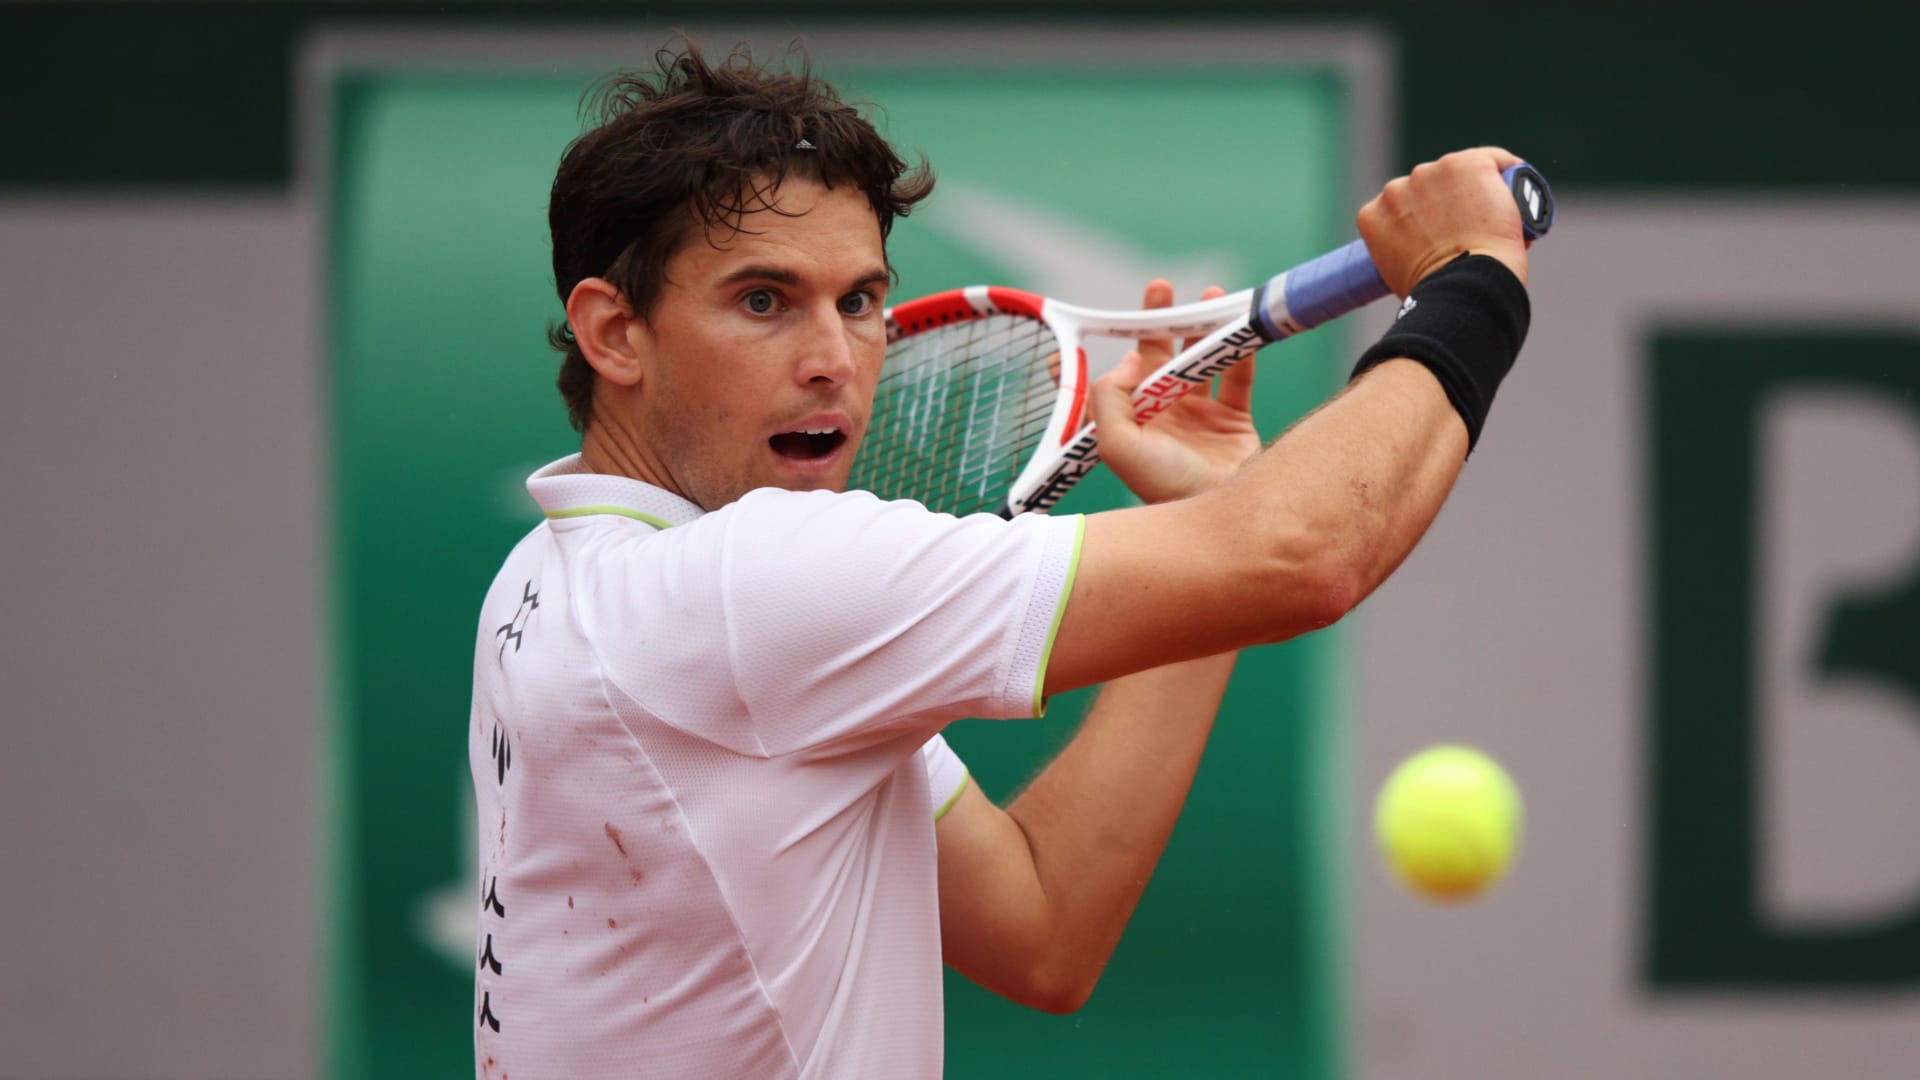 After 0-7 start, Dominic Thiem is winning again—and starting to enjoy his comeback